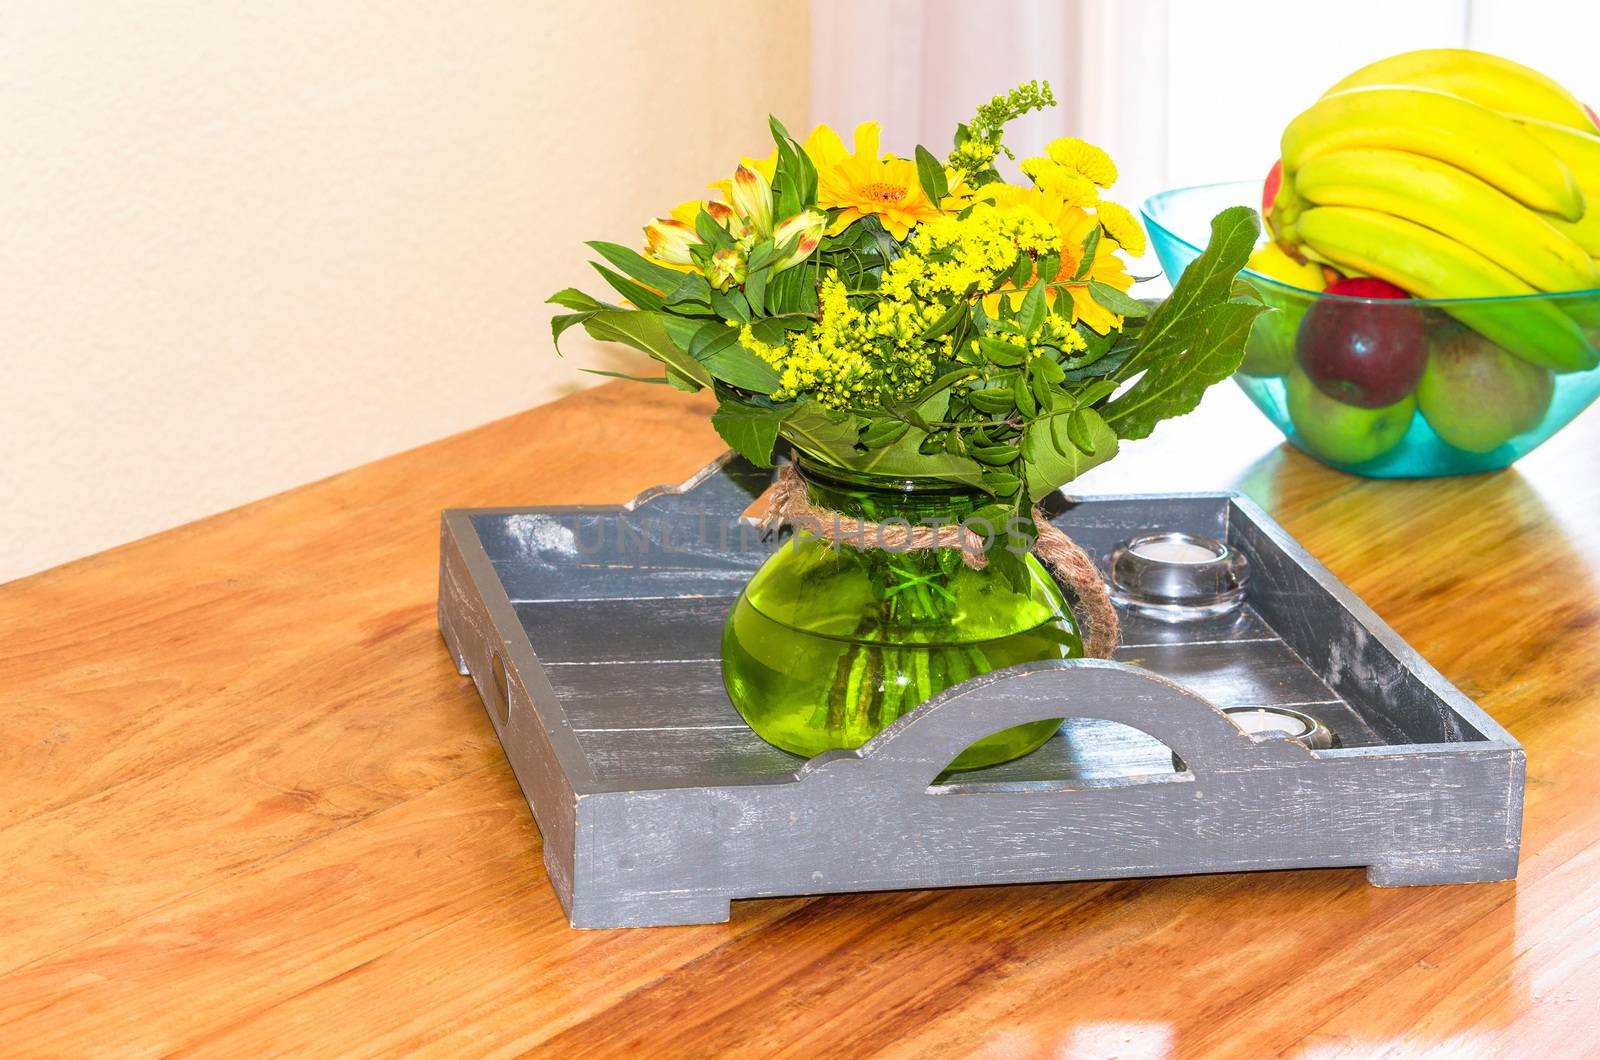 Decorative floral arrangement with assorted flowers on a table.